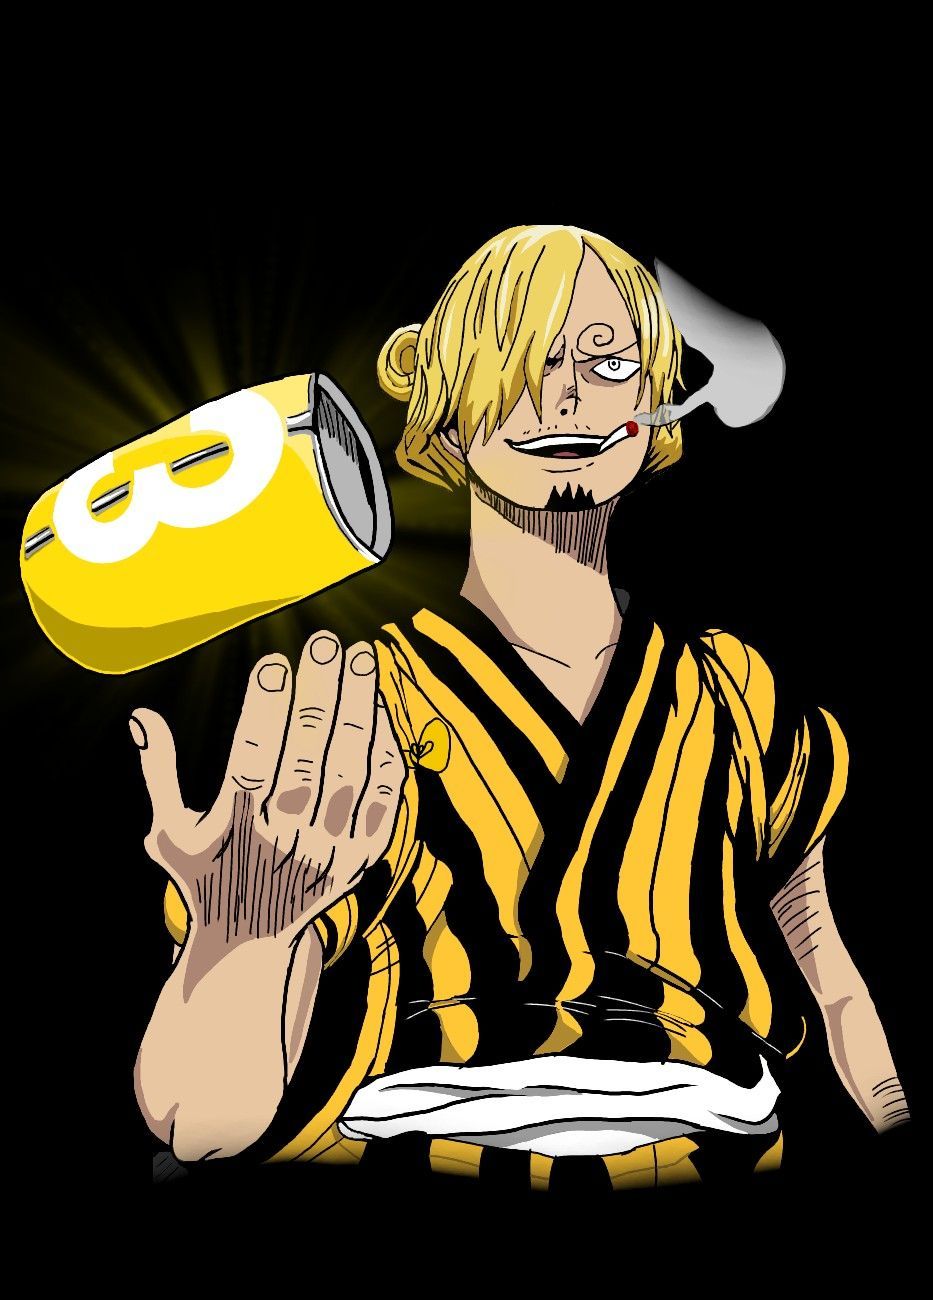 10 anime characters who can outcook Sanji from One Piece